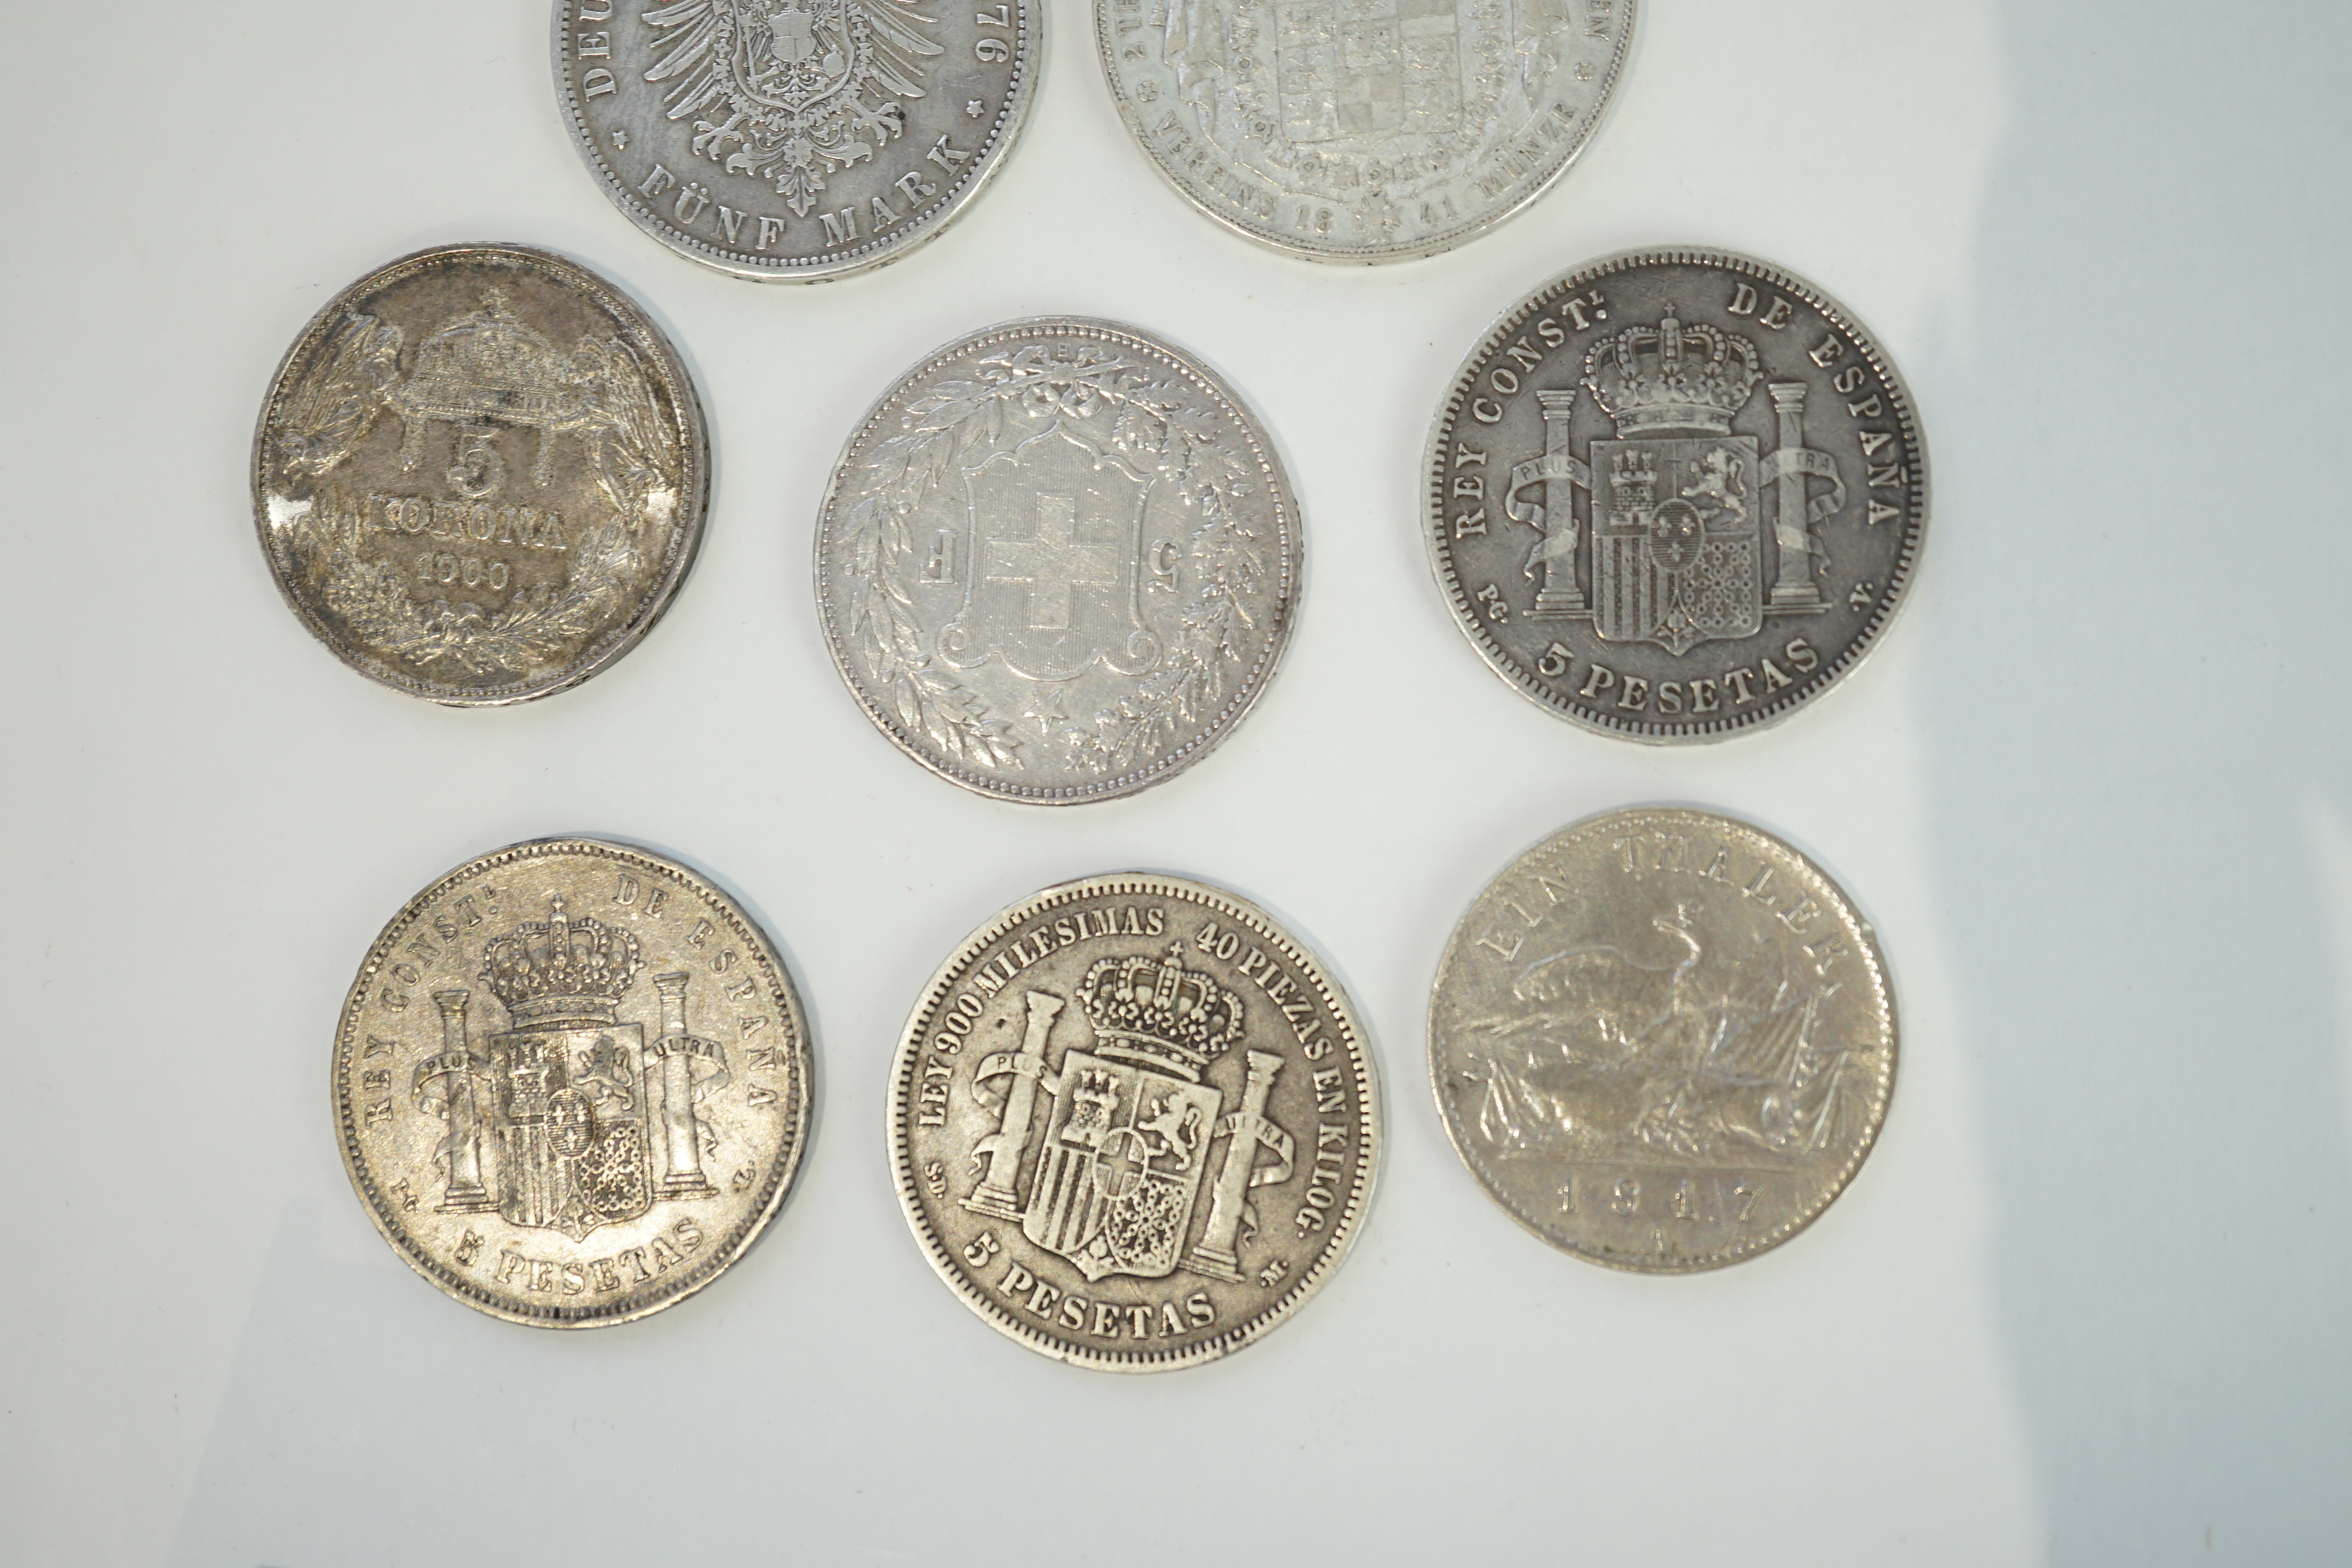 European coins, 18th - 20th century, including German states – Prussia, 1817A one Thaler, 1841A five marks, 1876B five marks, Switzerland, 1890 five francs, Austrian empire, 1900KB five korona, Spain 1871 five pesetas, 1